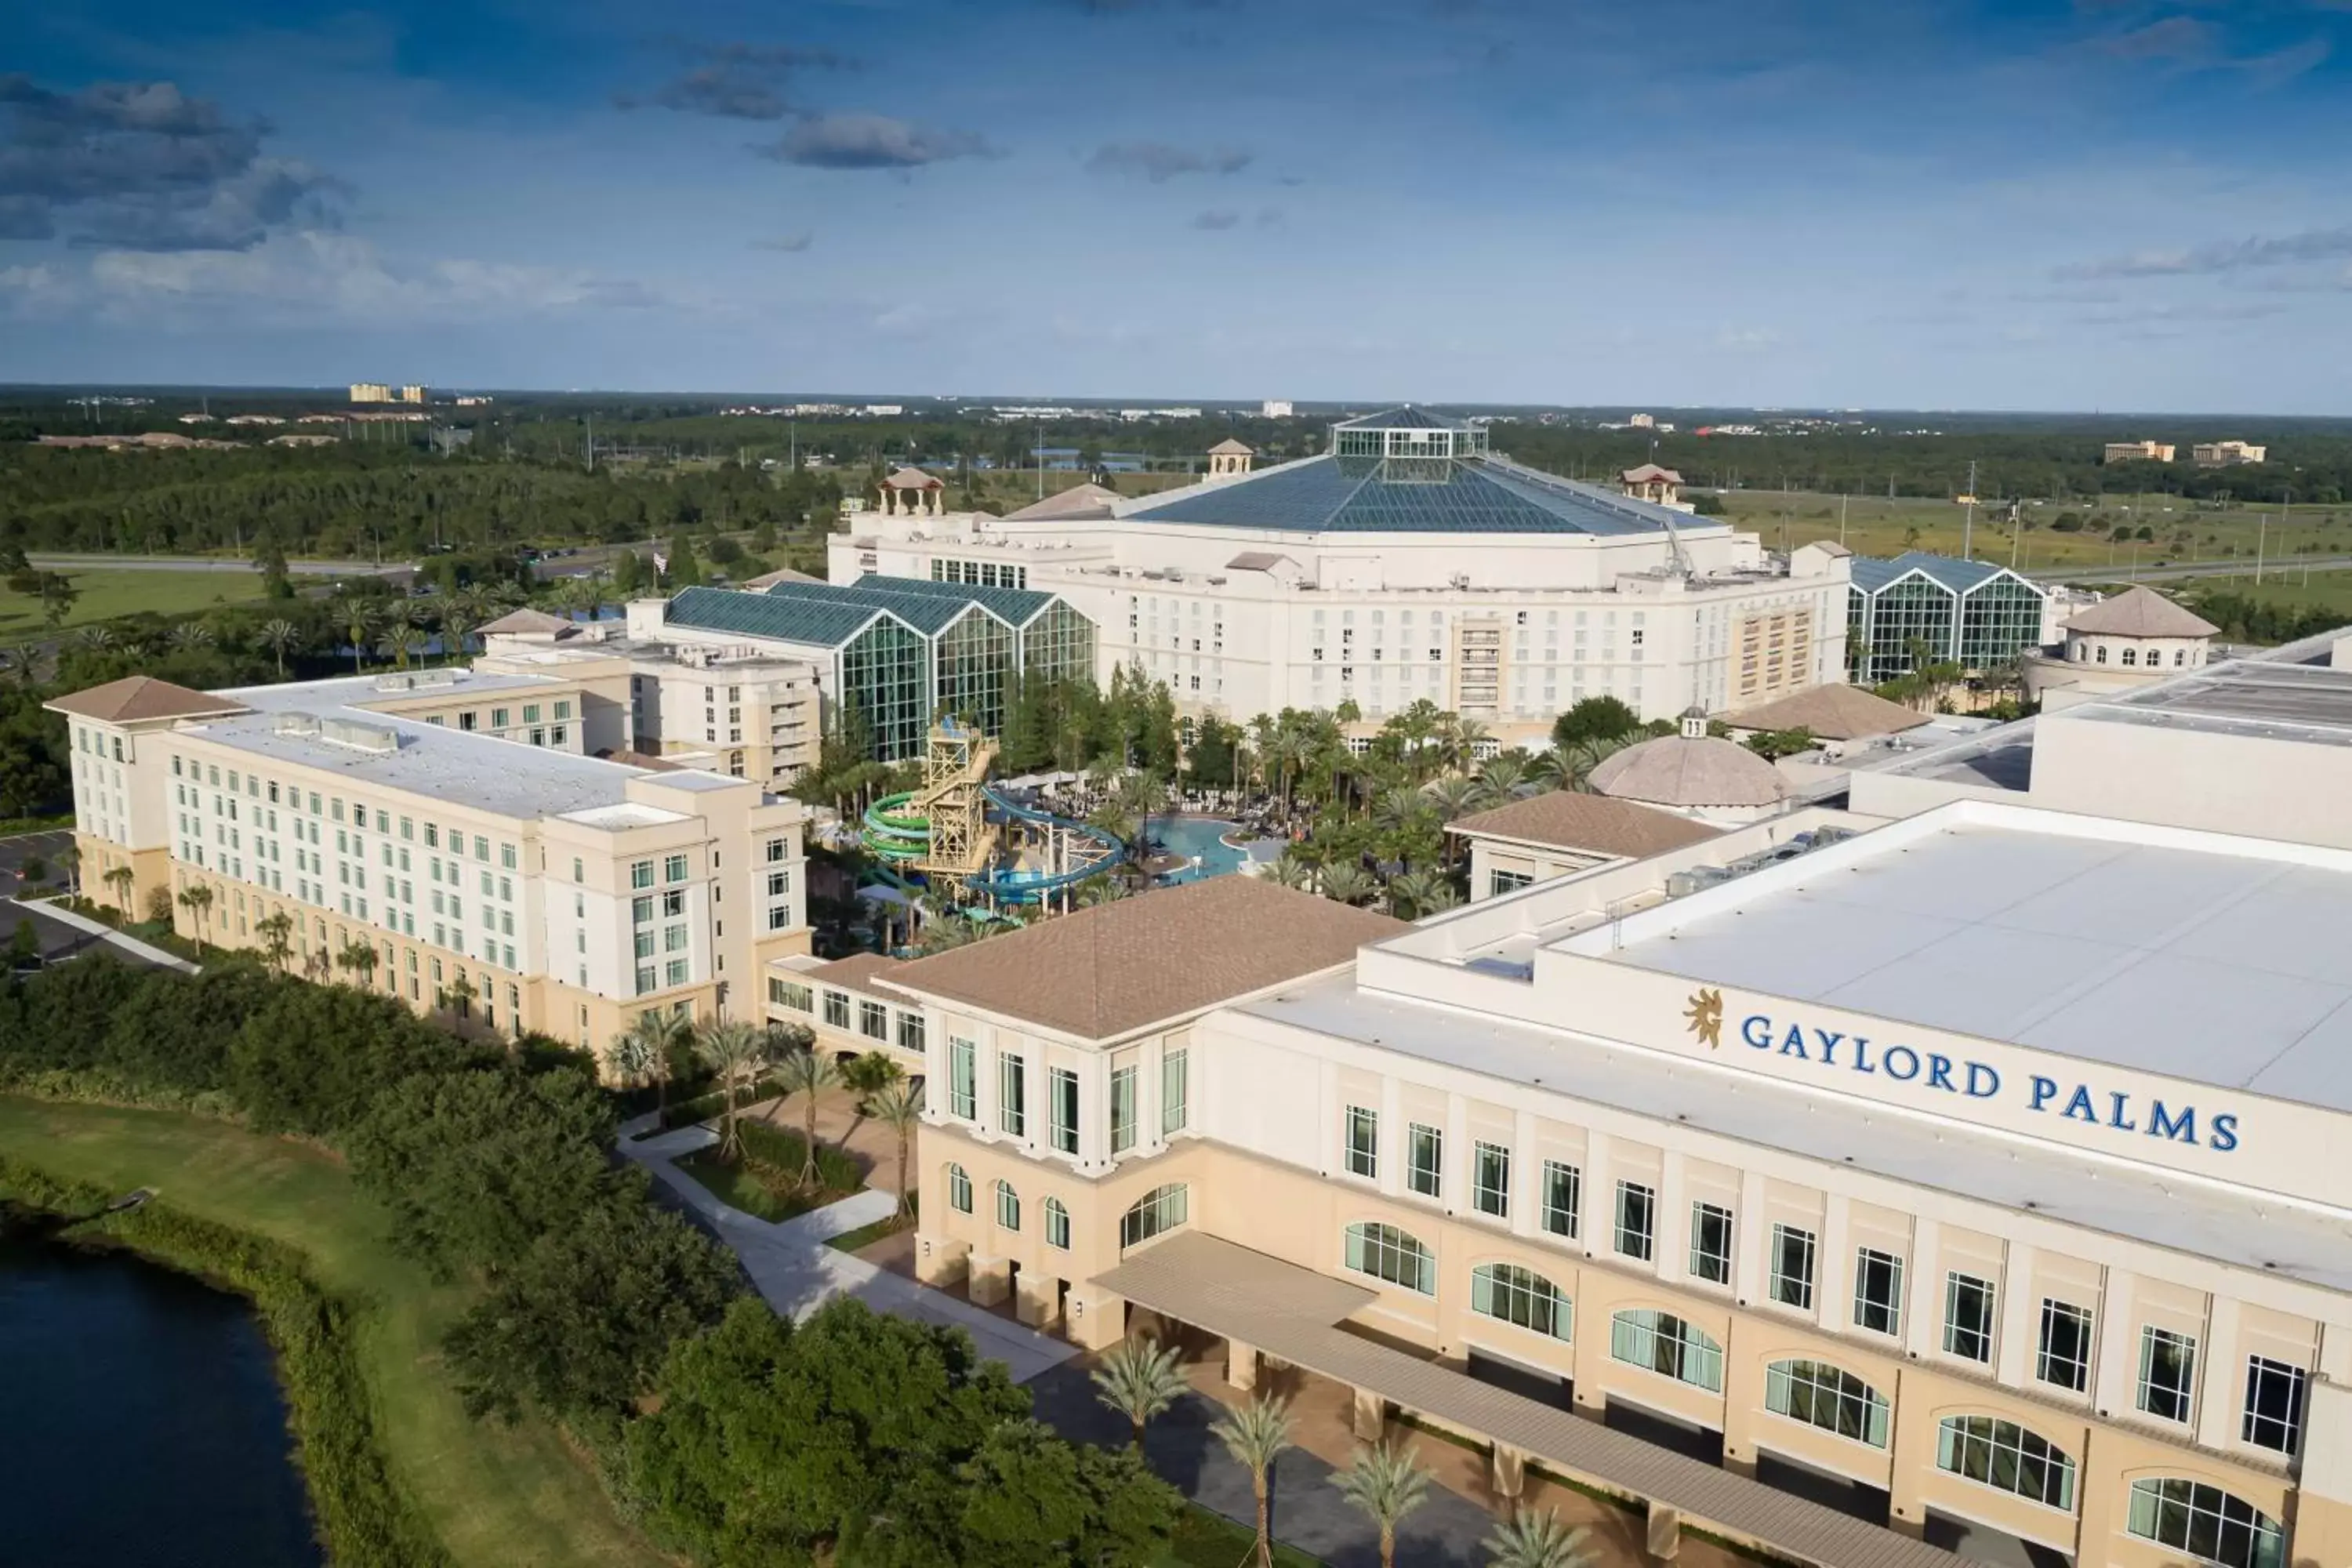 Property building, Bird's-eye View in Gaylord Palms Resort & Convention Center